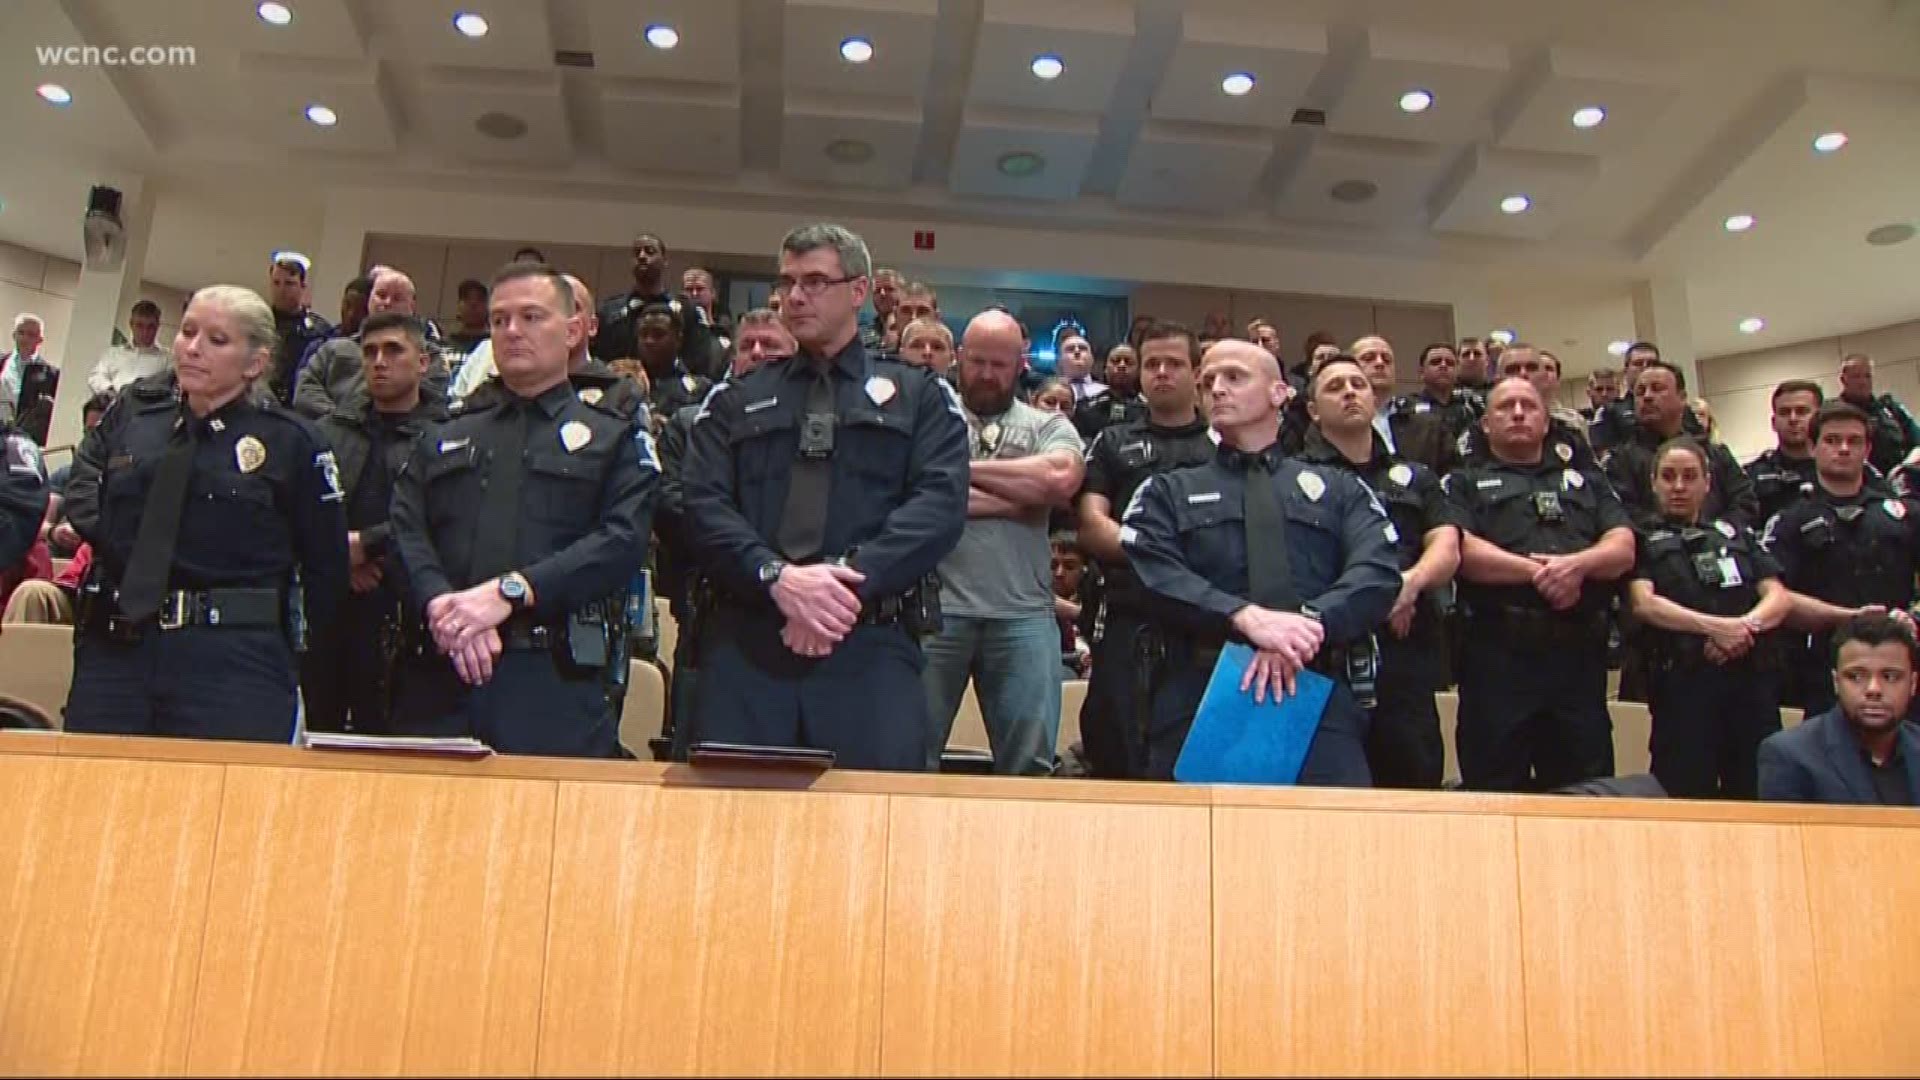 CMPD officers fill council meeting over pay